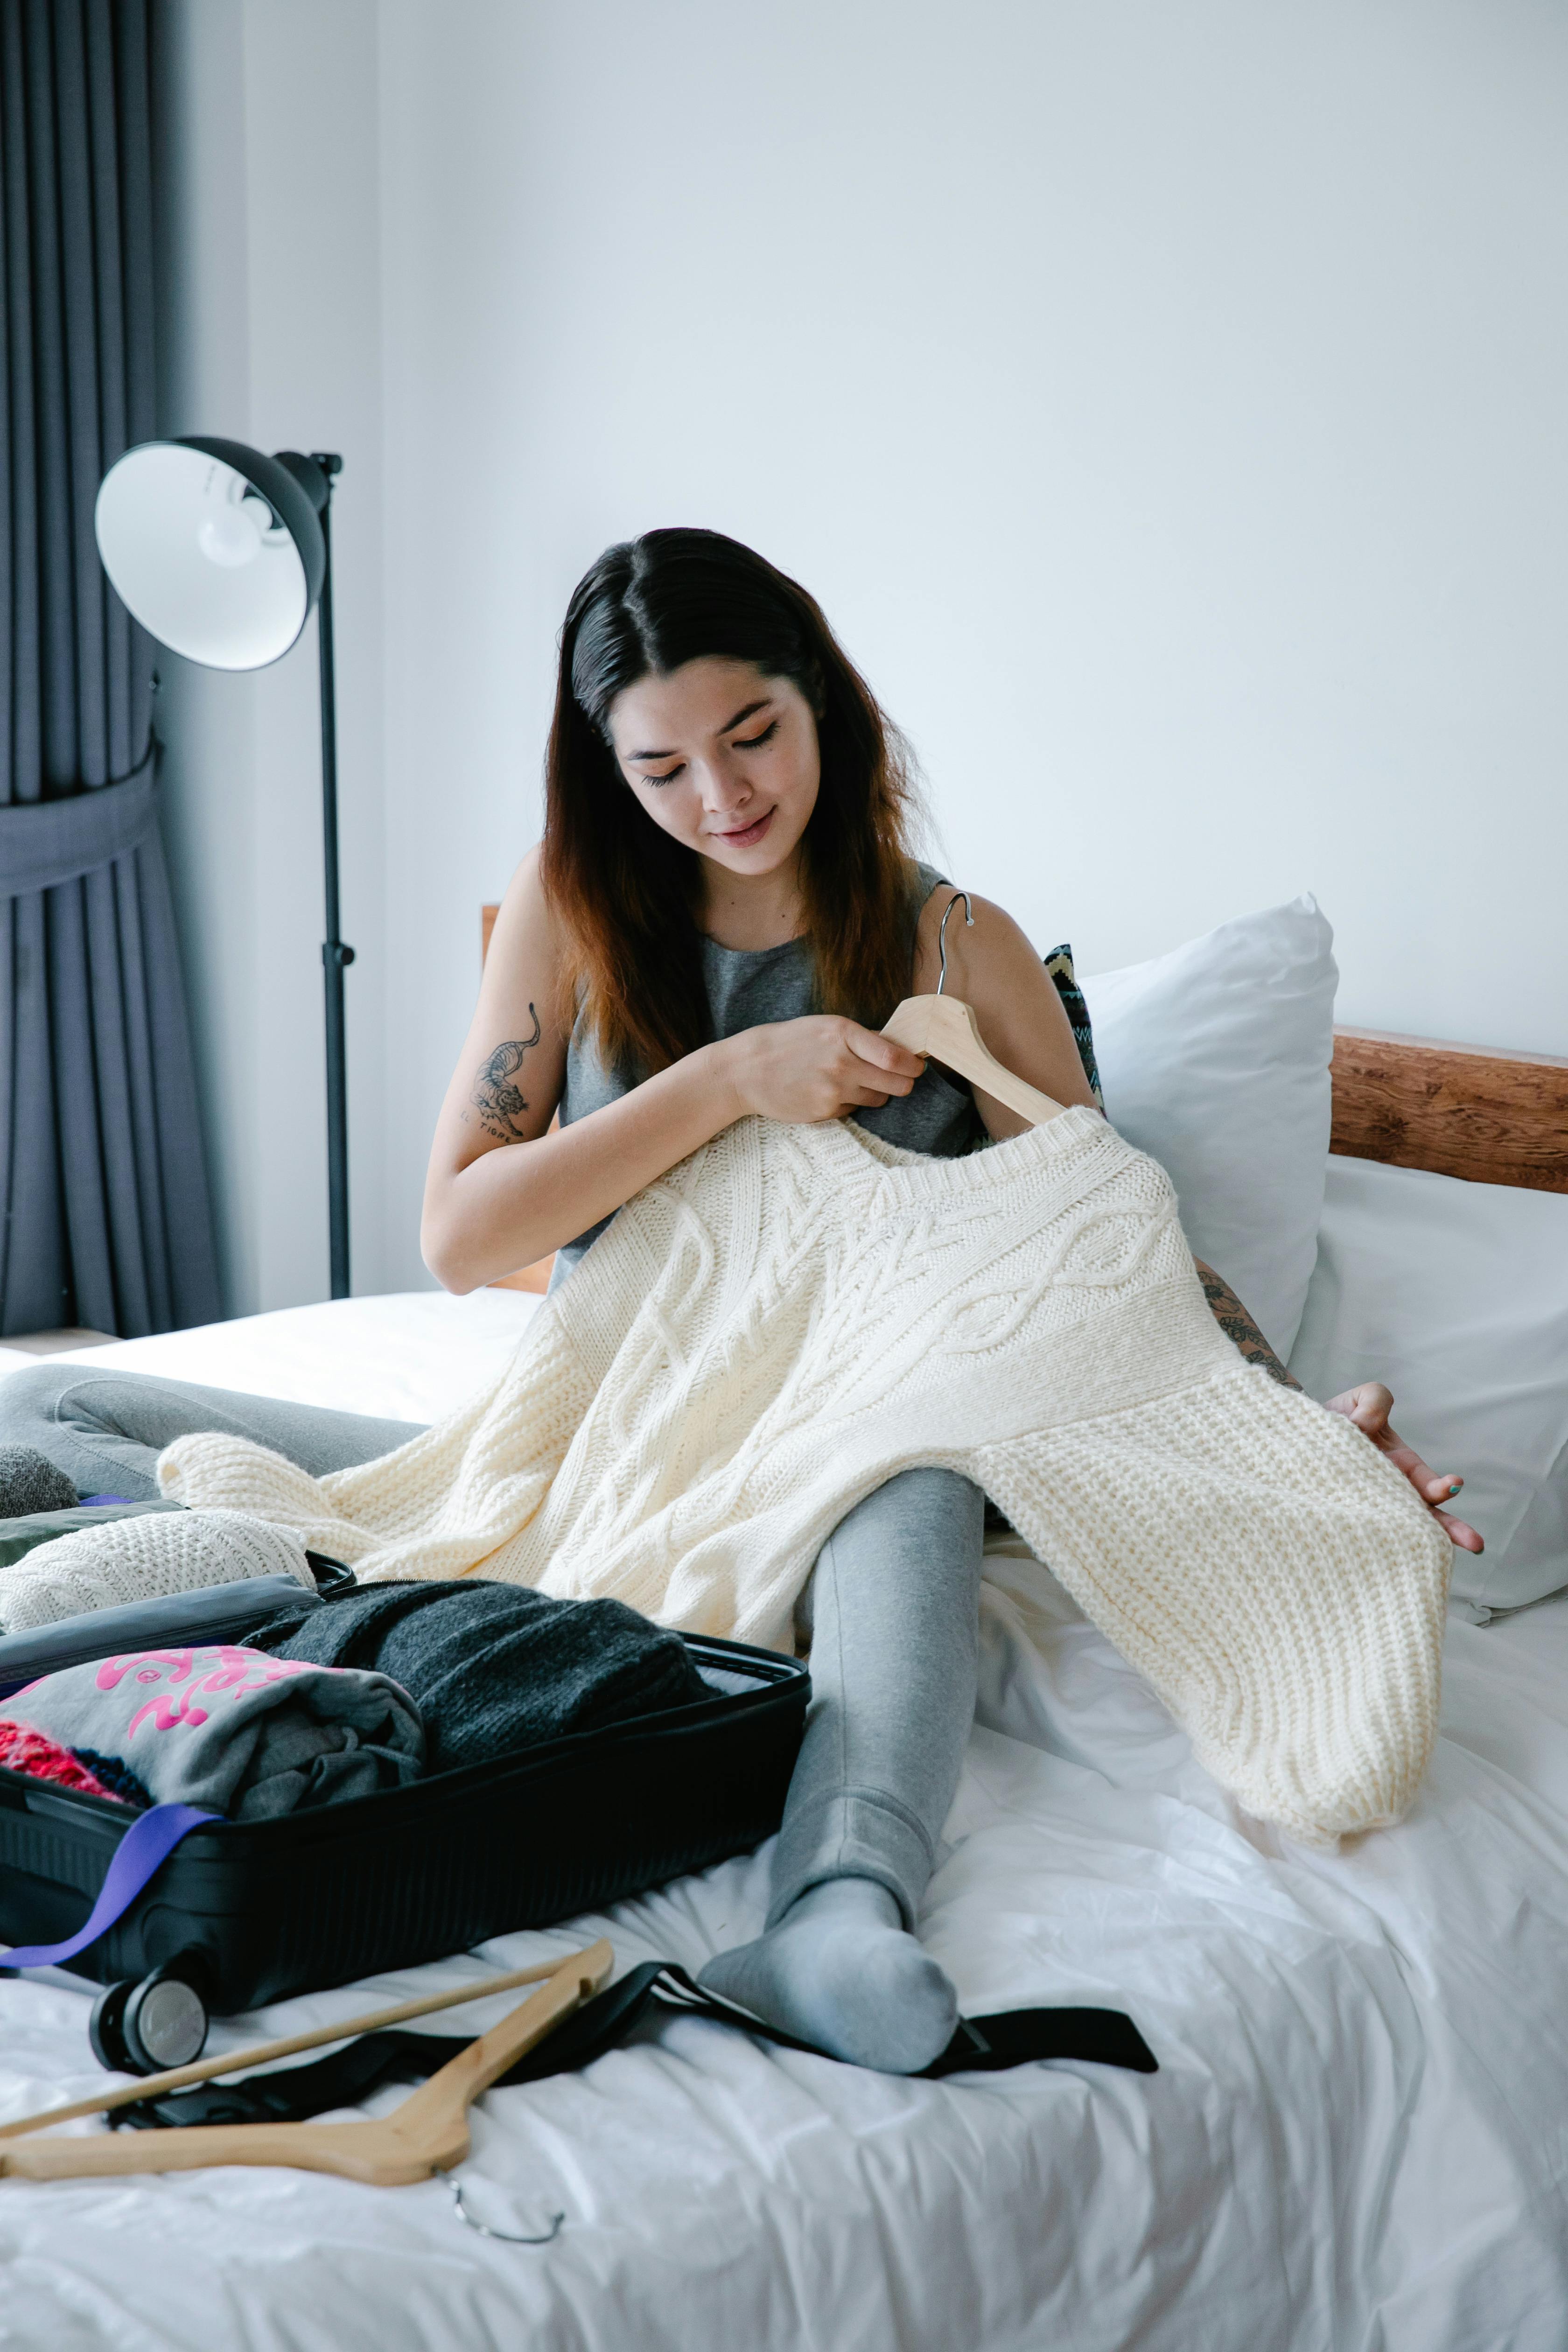 A woman sitting on the bed while holding a sweater | Source: Pexels